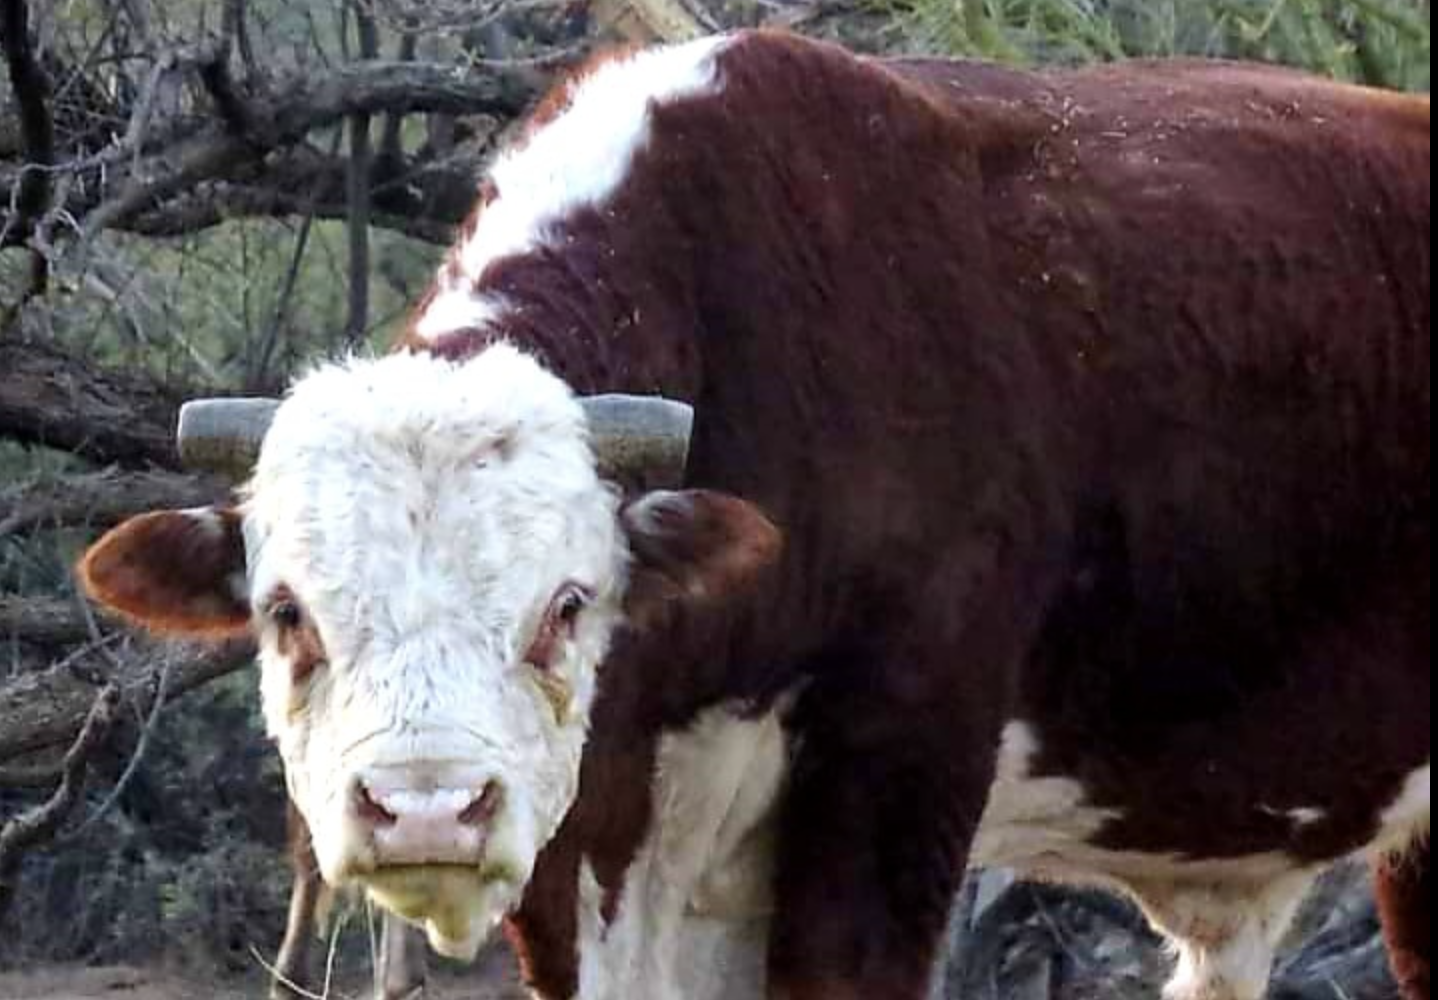 Would it be strange to try and save a Salt River wild Bull?